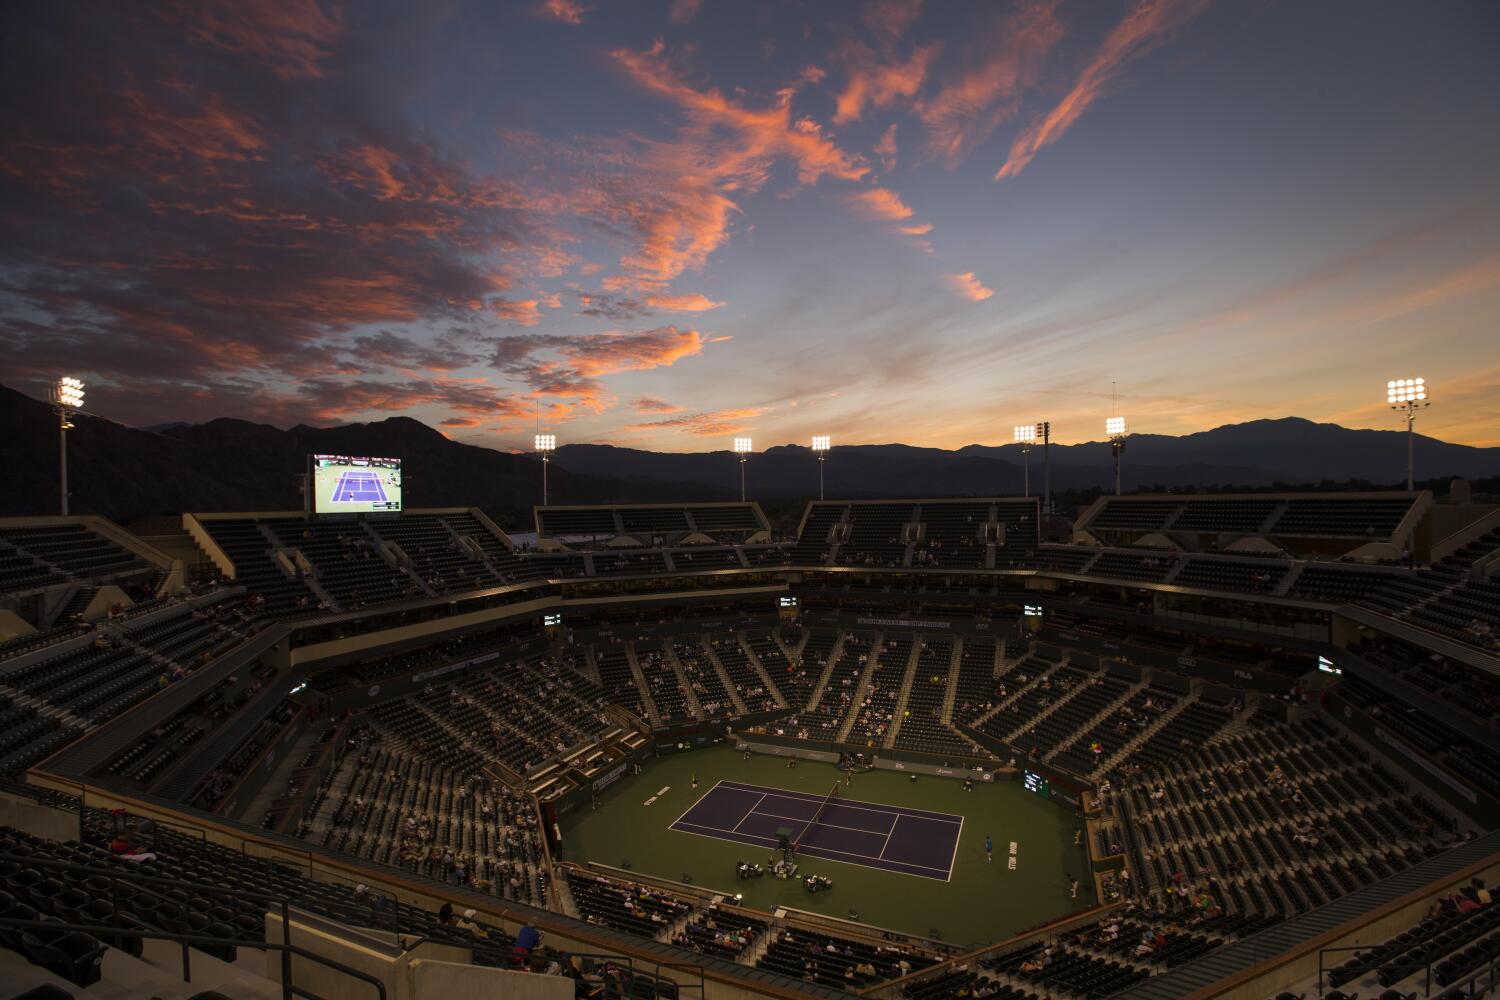 Commentary: Even after 25 years, Indian Wells continues to live up to its tennis paradise hype 